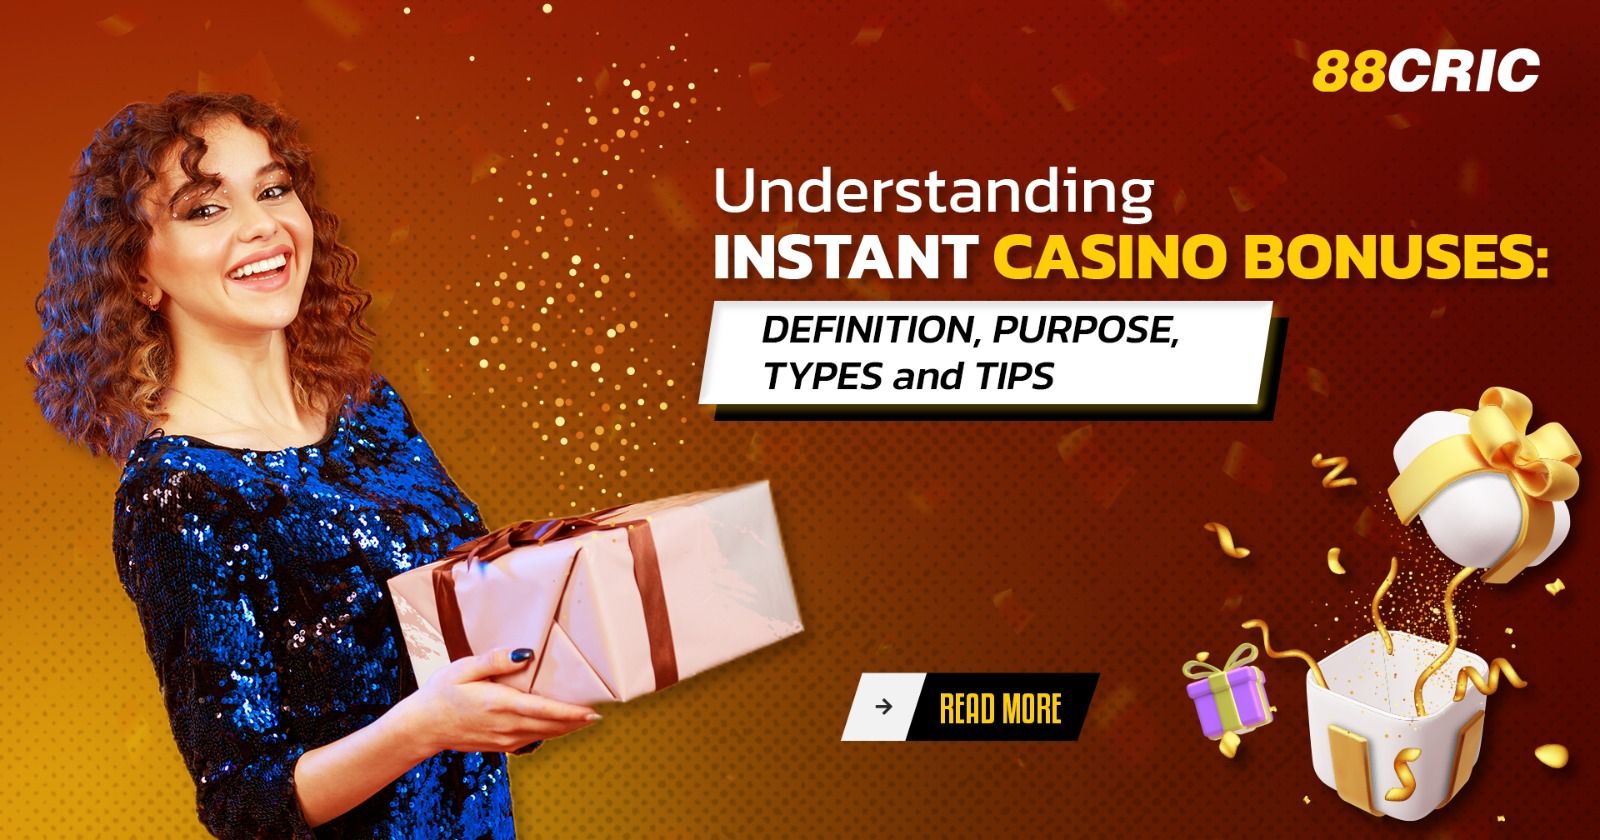 Instant Casino Bonuses: Definition, Purpose, Types and Tips.